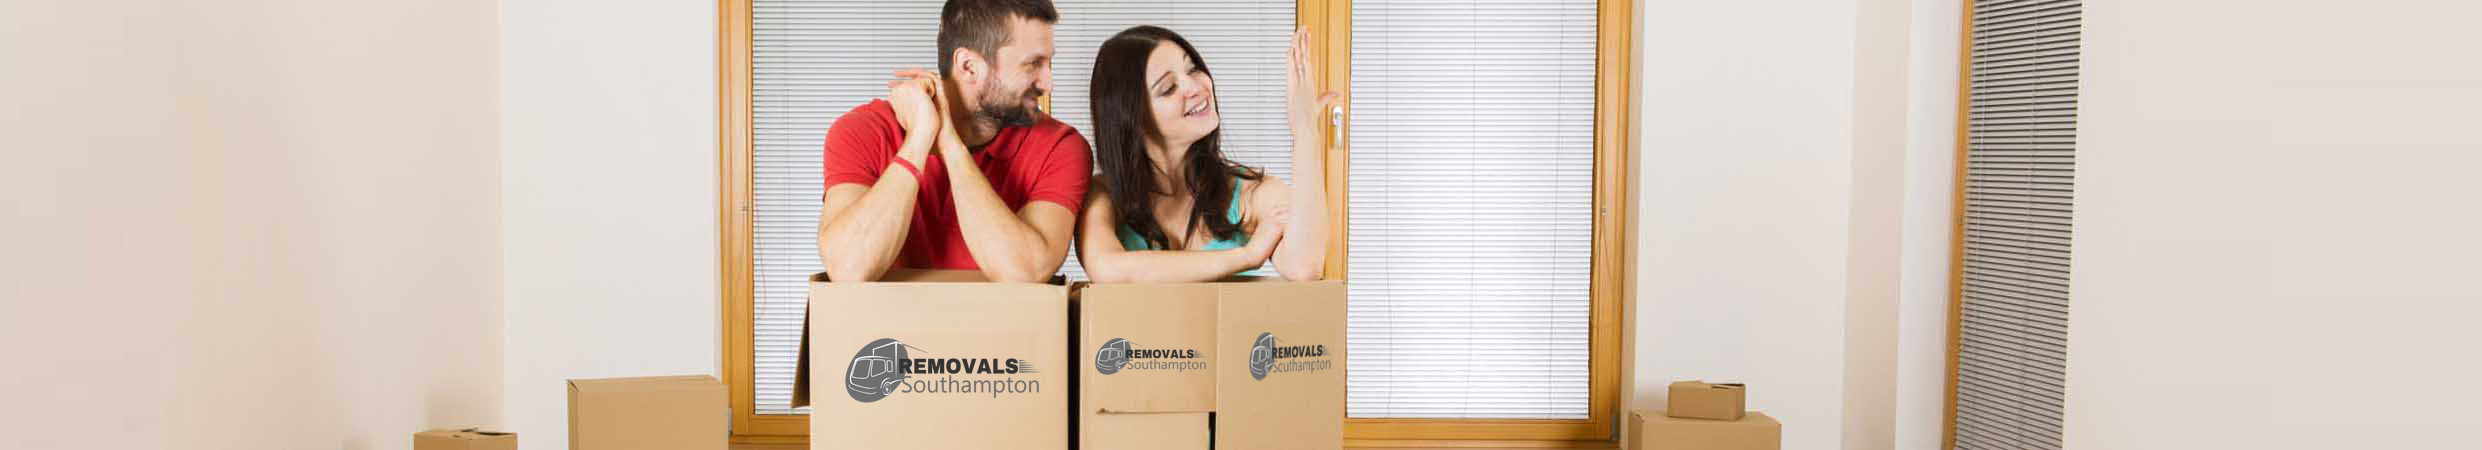 Book Now for Removals Southampton for House Removals, Office Removals, International Removals